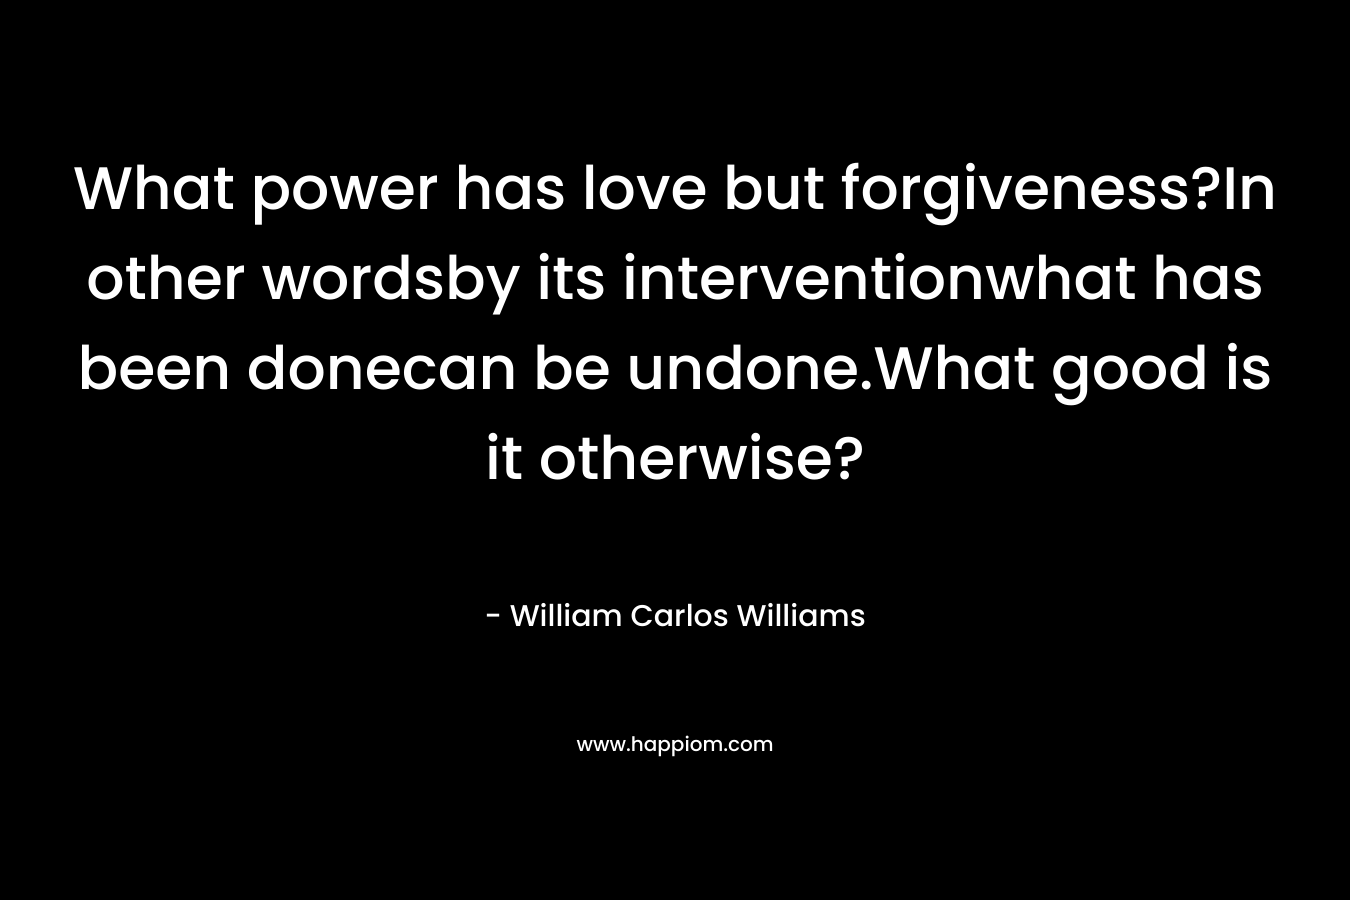 What power has love but forgiveness?In other wordsby its interventionwhat has been donecan be undone.What good is it otherwise?